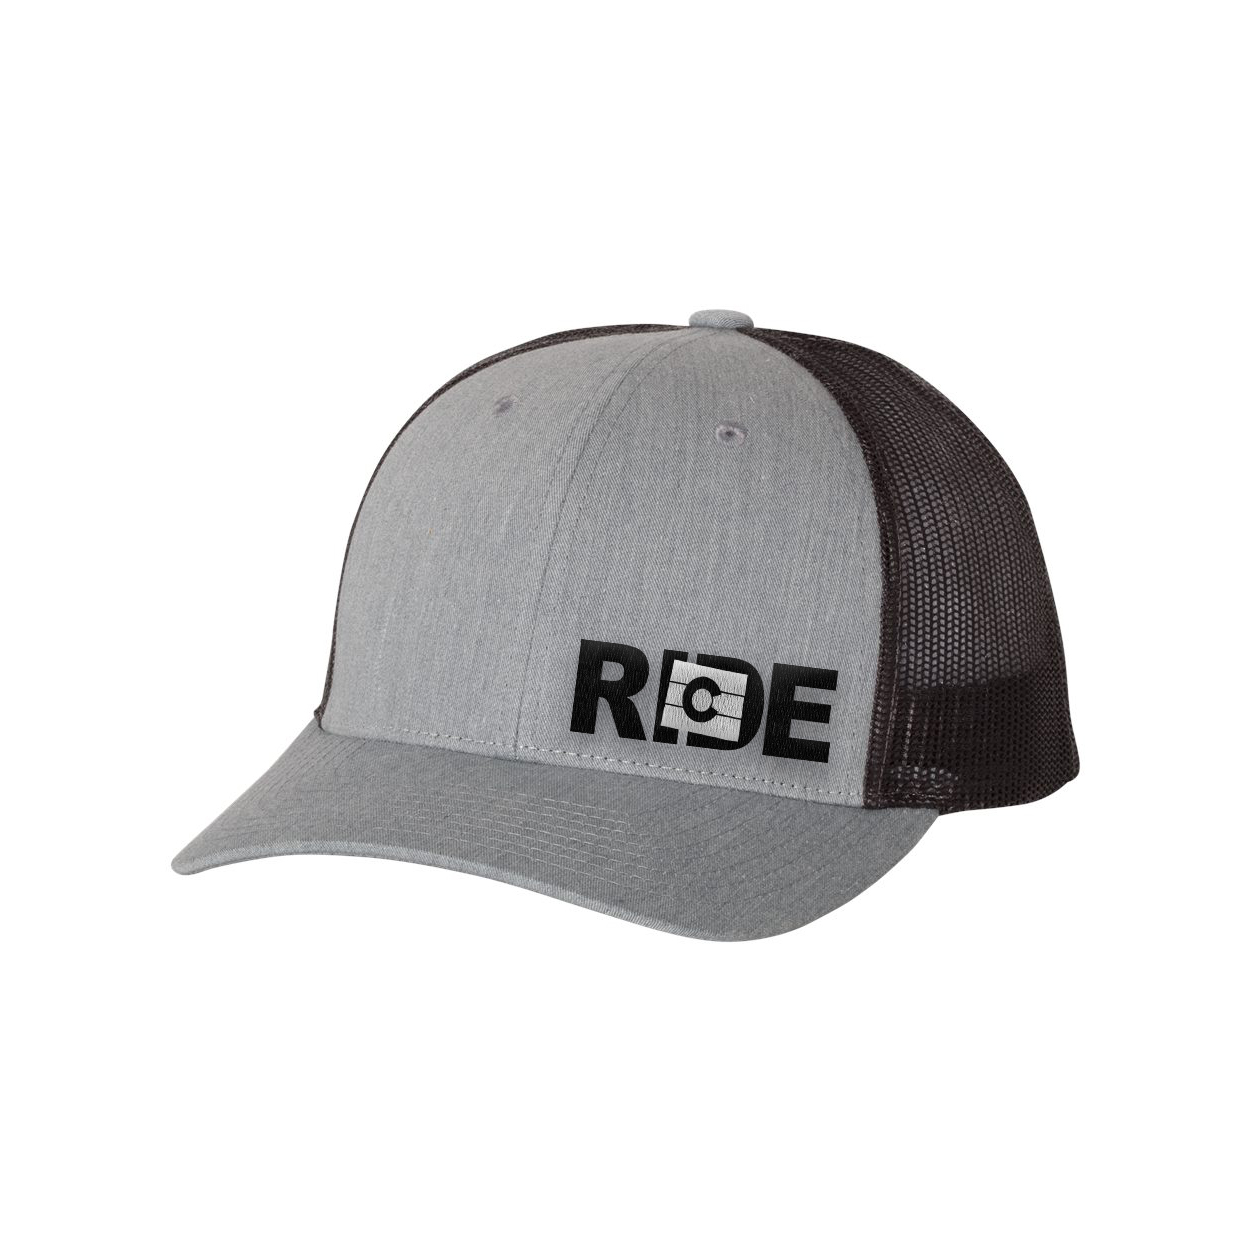 Ride Colorado Classic Pro Night Out Embroidered Snapback Trucker Hat Heather Gray/Black